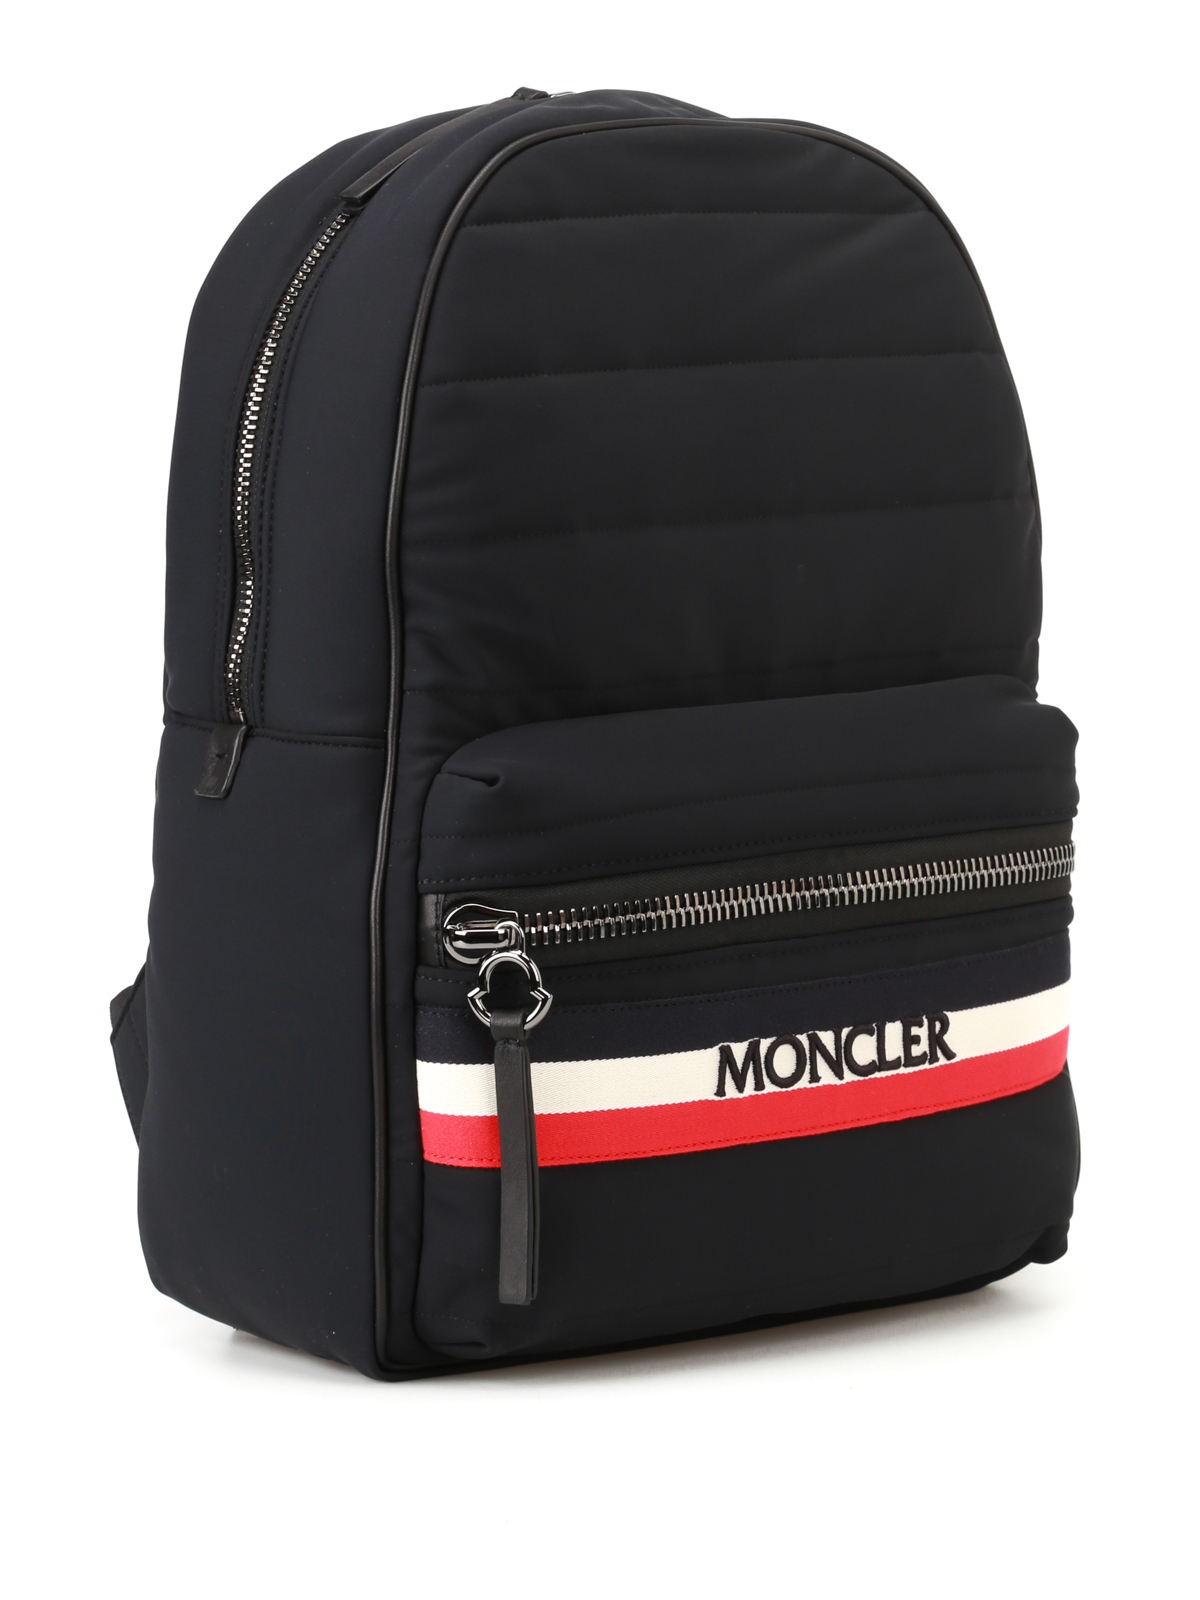 Moncler Sac A Dos Deals, 70% OFF | www.angloamericancentre.it